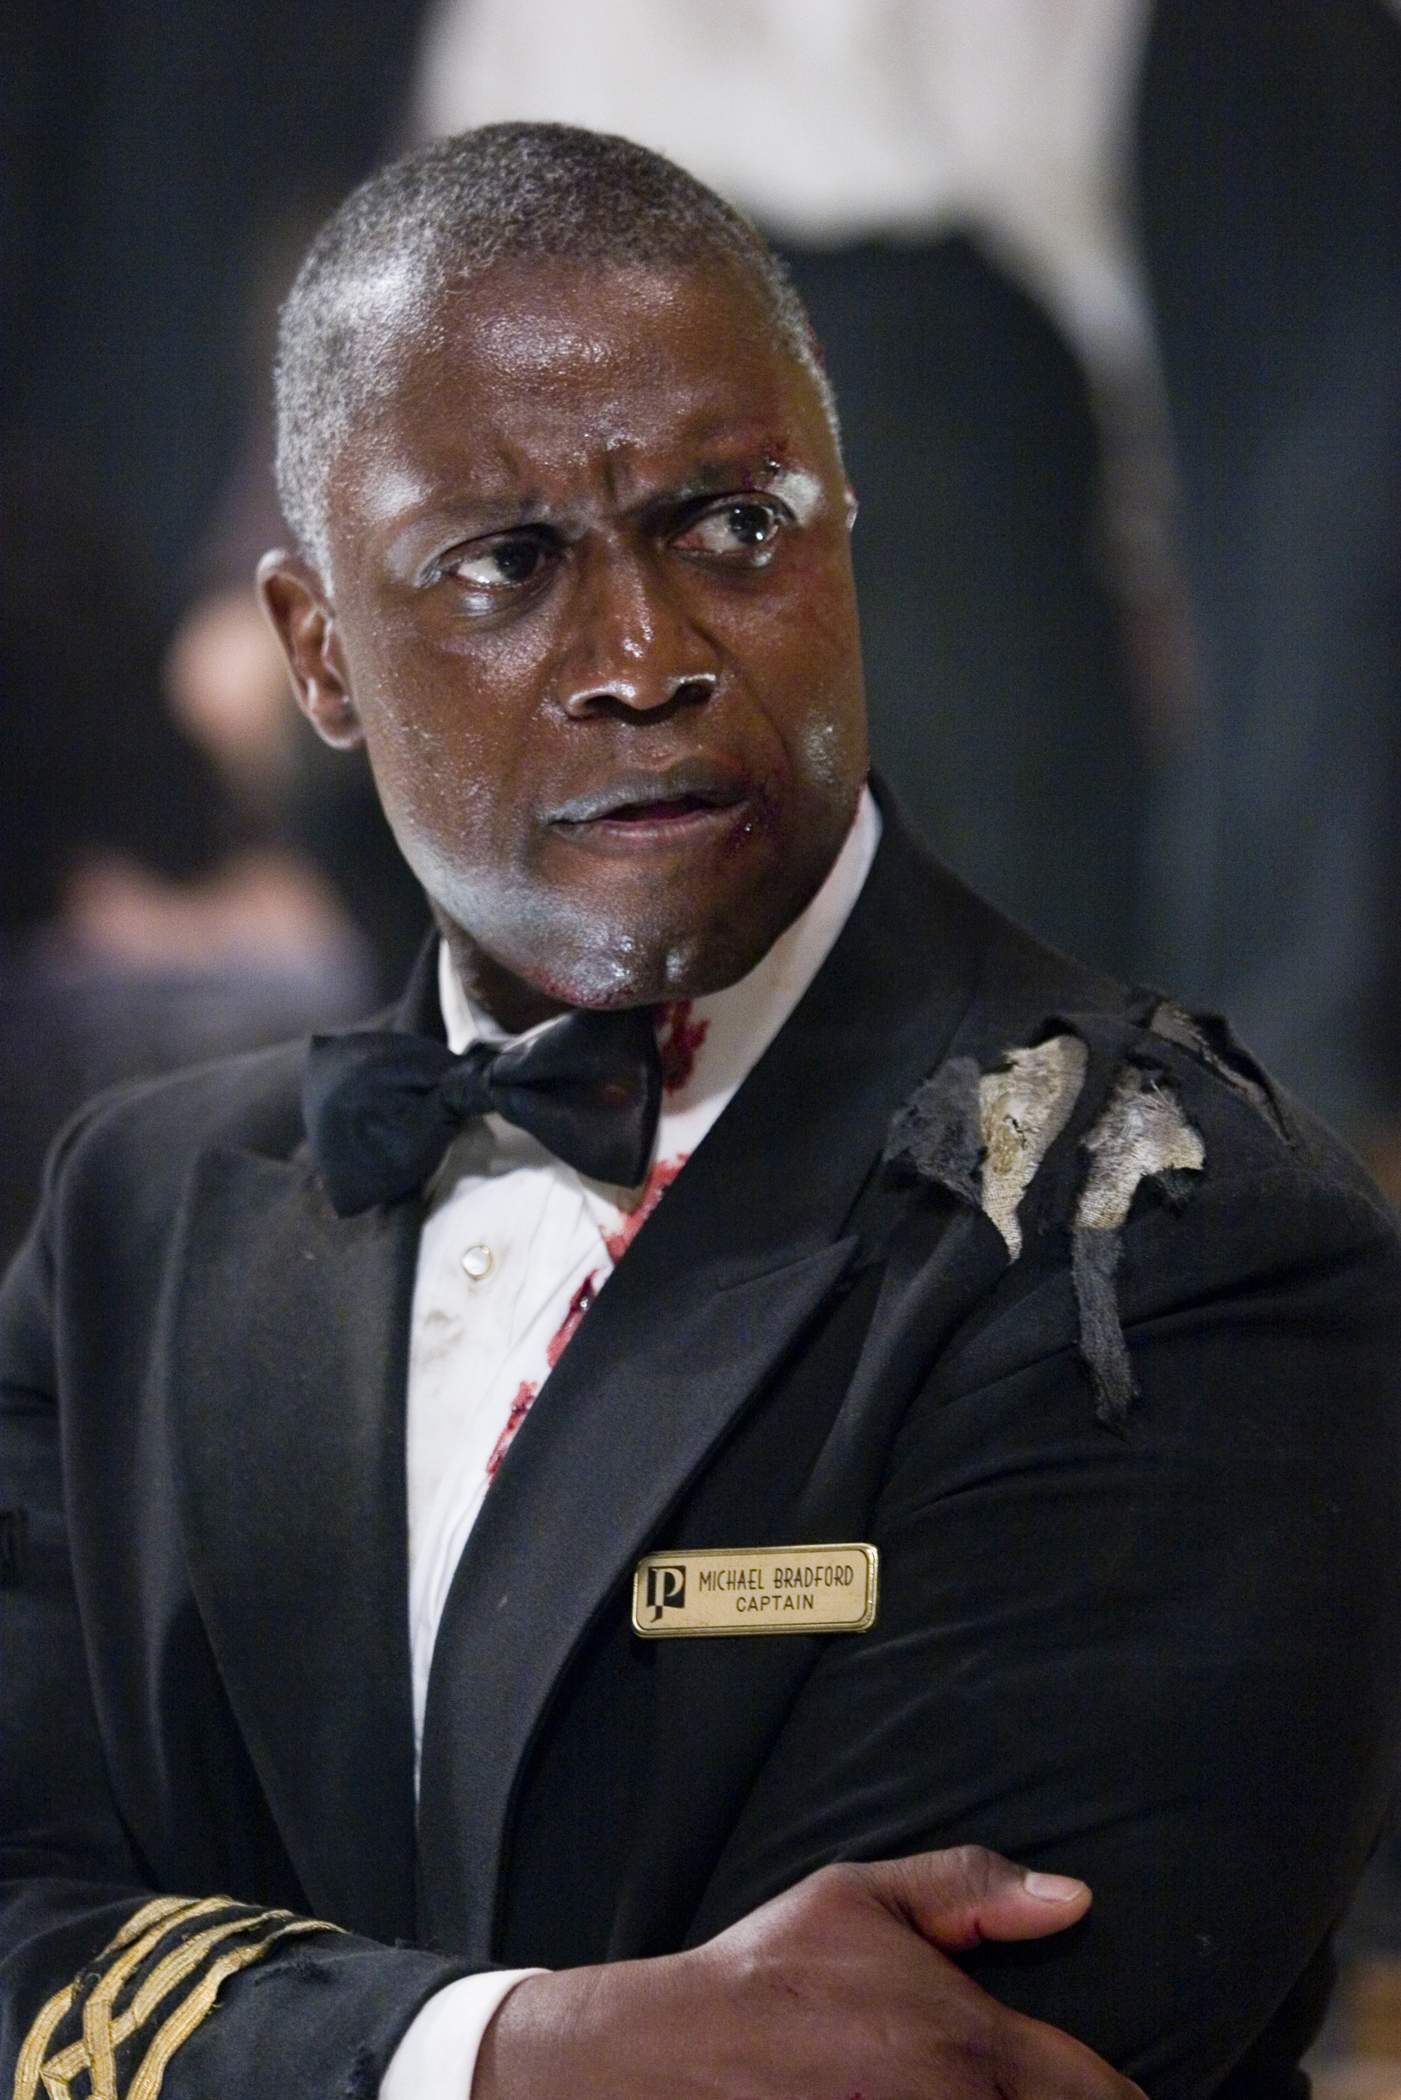 ANDRE BRAUGHER as Captain Bradford in Warner Bros Pictures' Poseidon (2006)